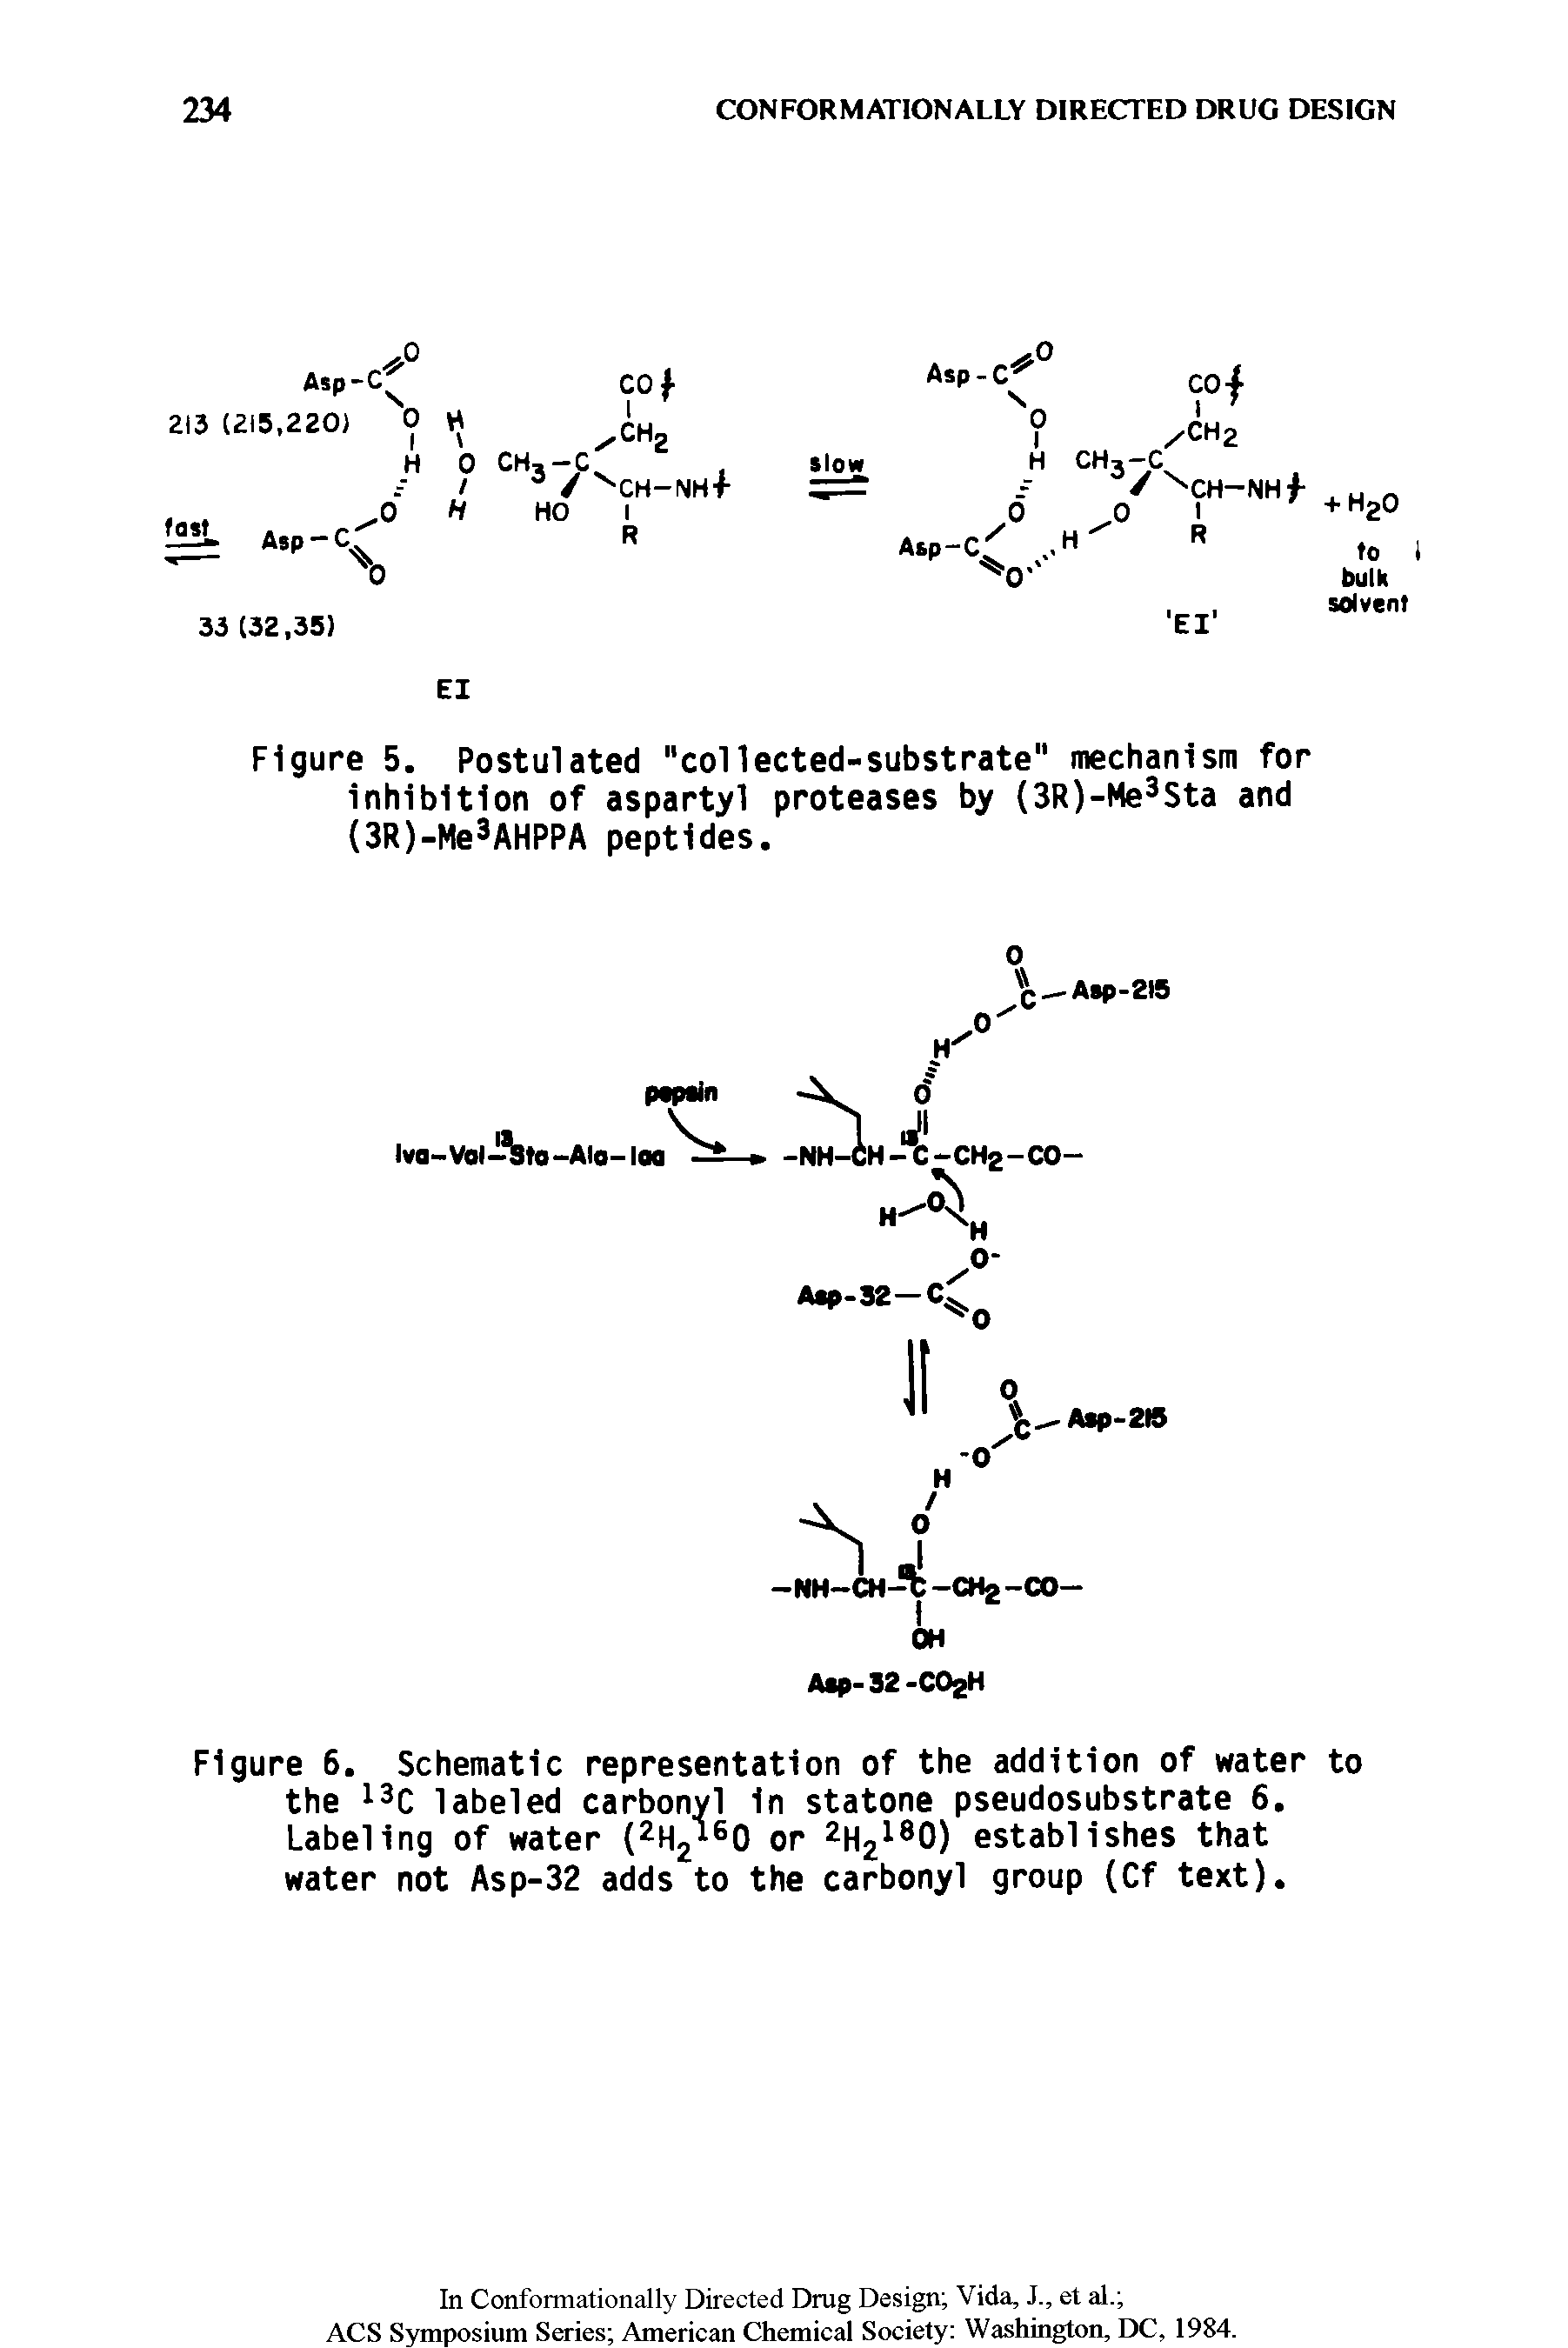 Figure 6. Schematic representation of the addition of water to the labeled carbonyl in statone pseudosubstrate 6. Labeling of water 2H2 0 or 2h21 0) establishes that water not Asp-32 adds to the carbonyl group (Cf text).